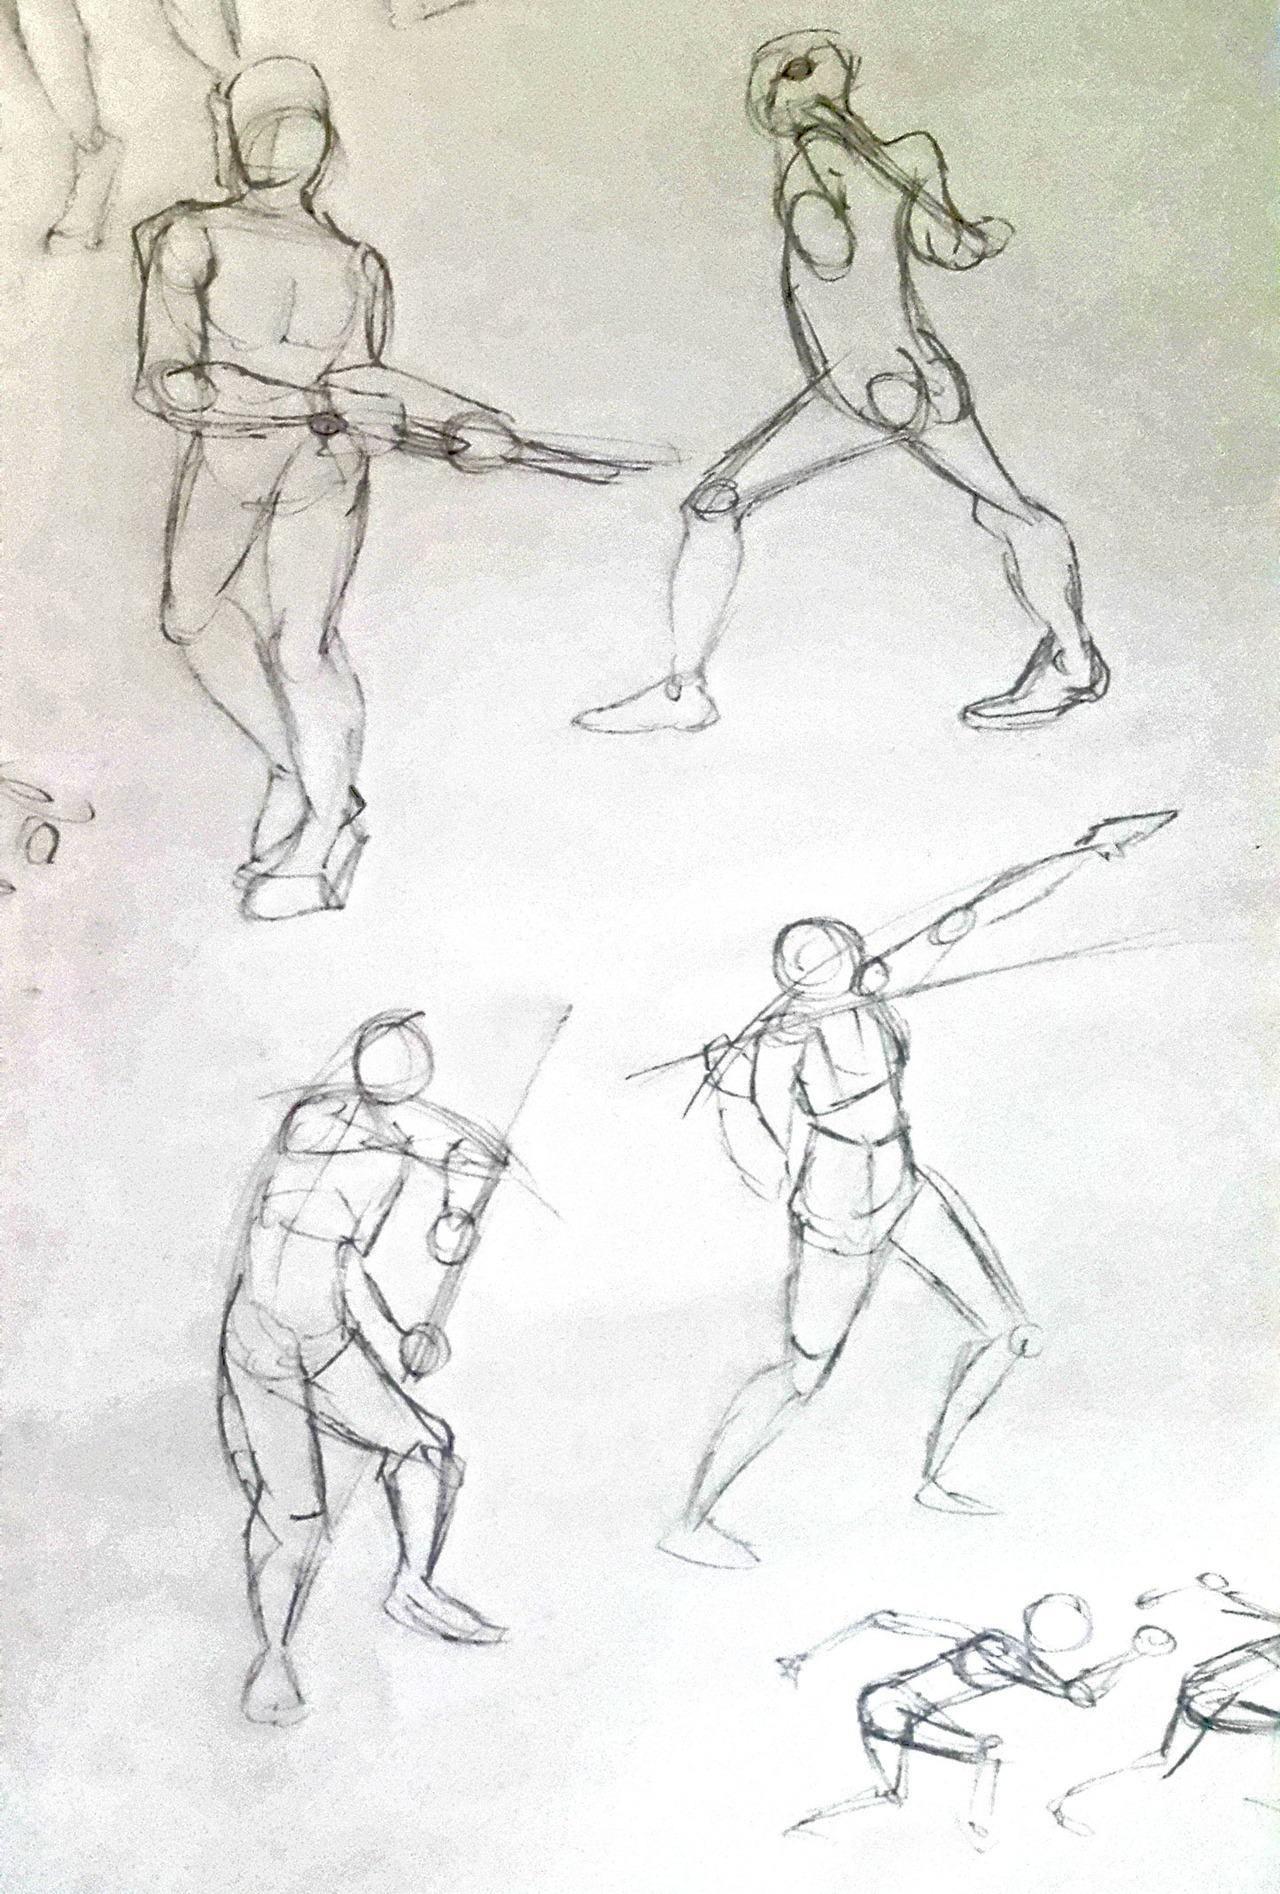 Re-drawing masculinity Figure Drawing Workshop - November 2020